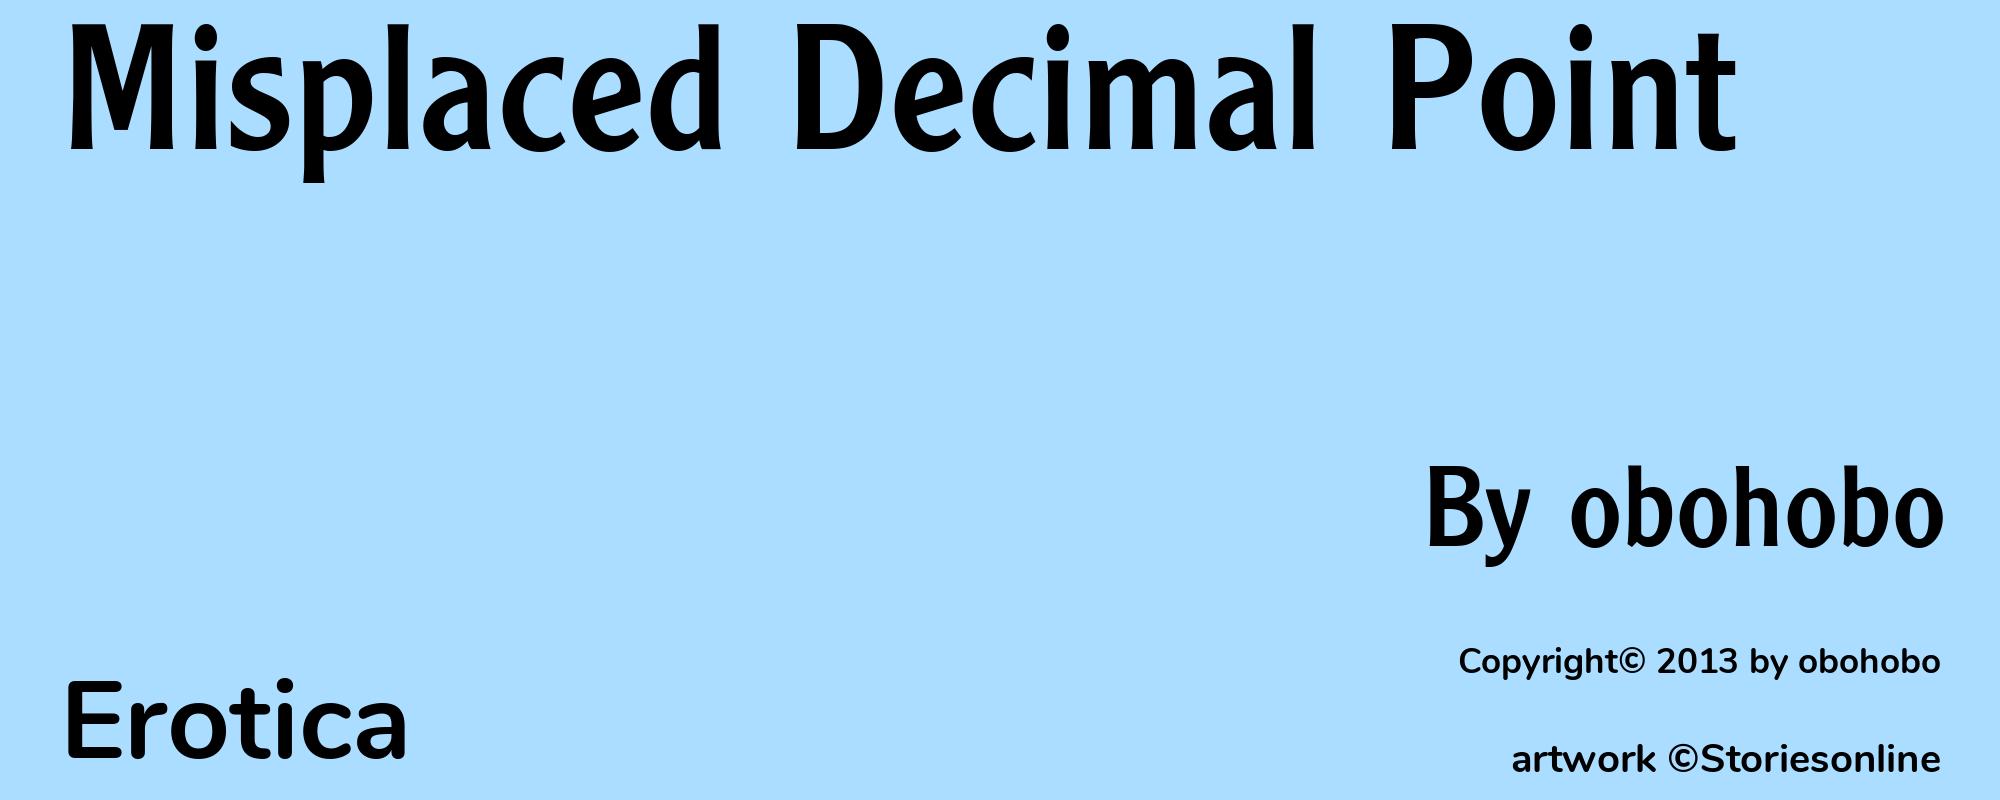 Misplaced Decimal Point - Cover